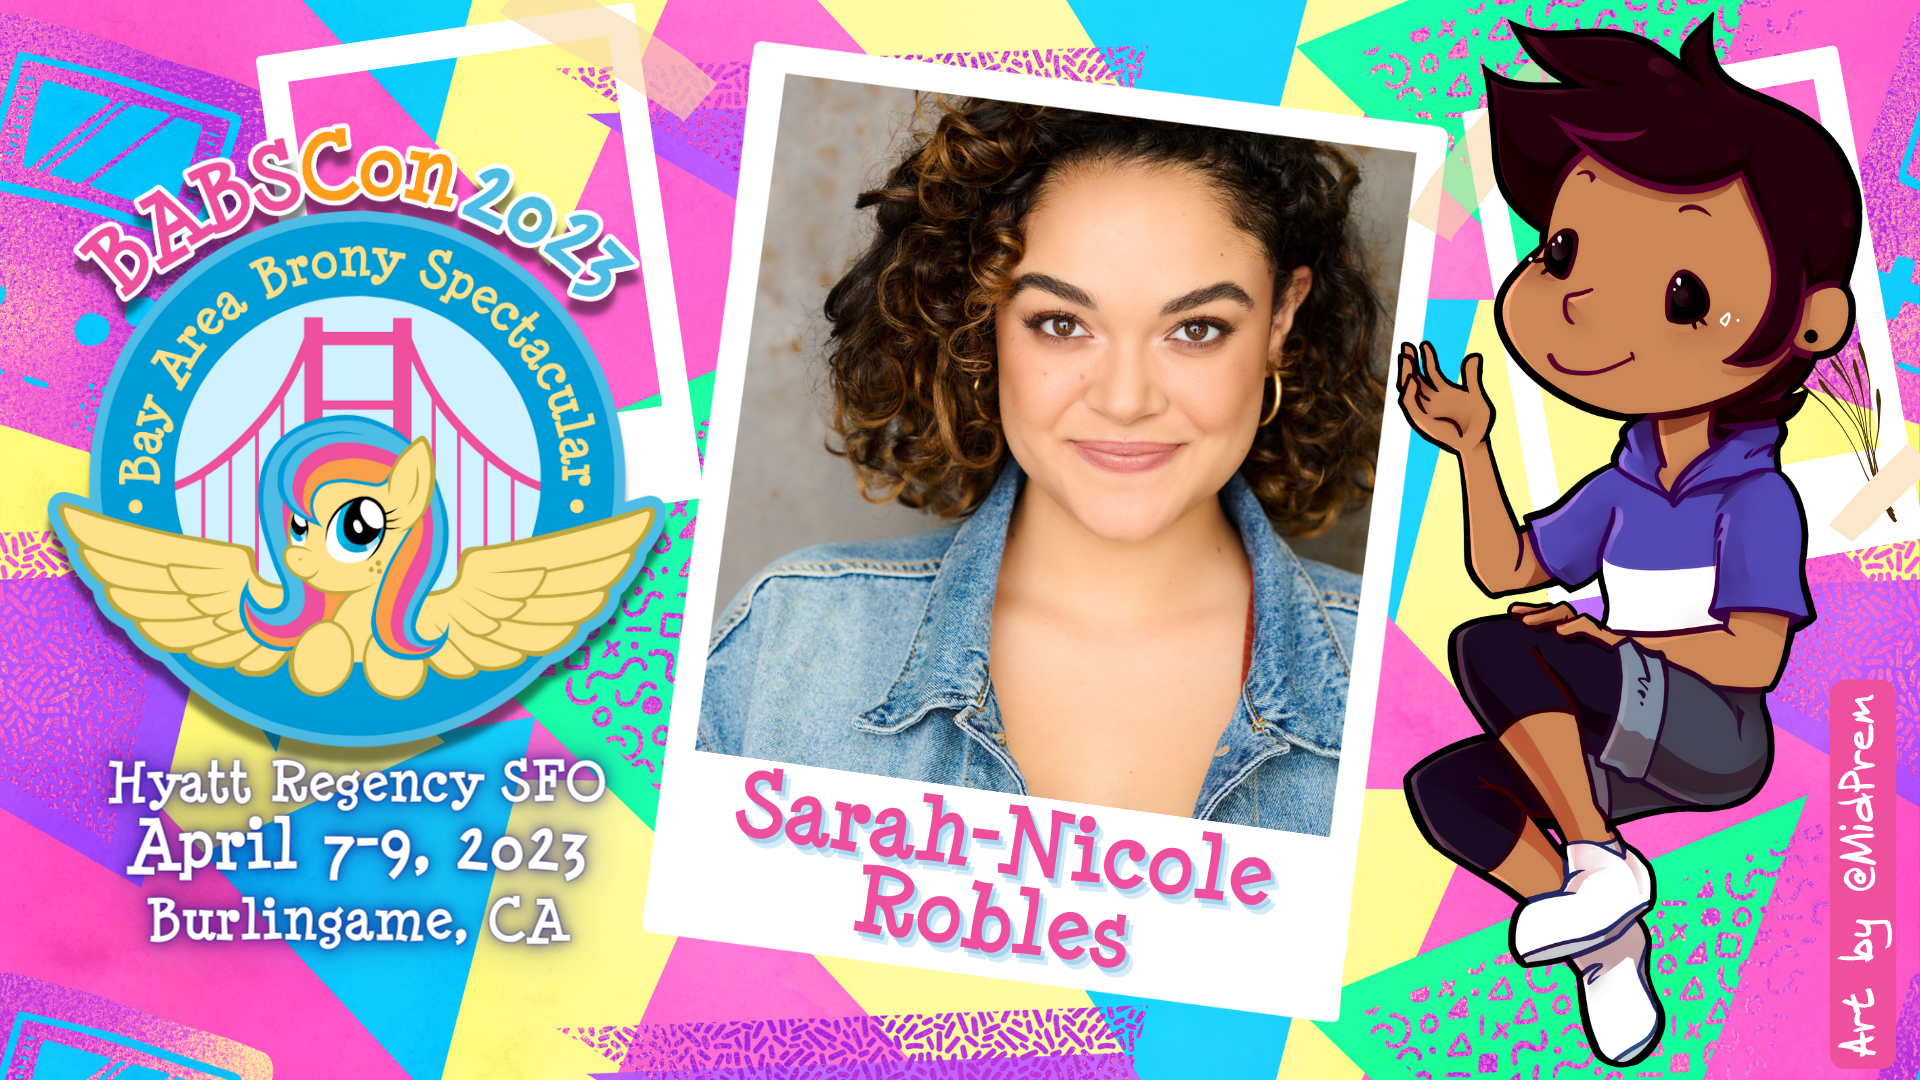 BABSCon 2023 Brings the Owl Magic with Sarah-Nicole Robles